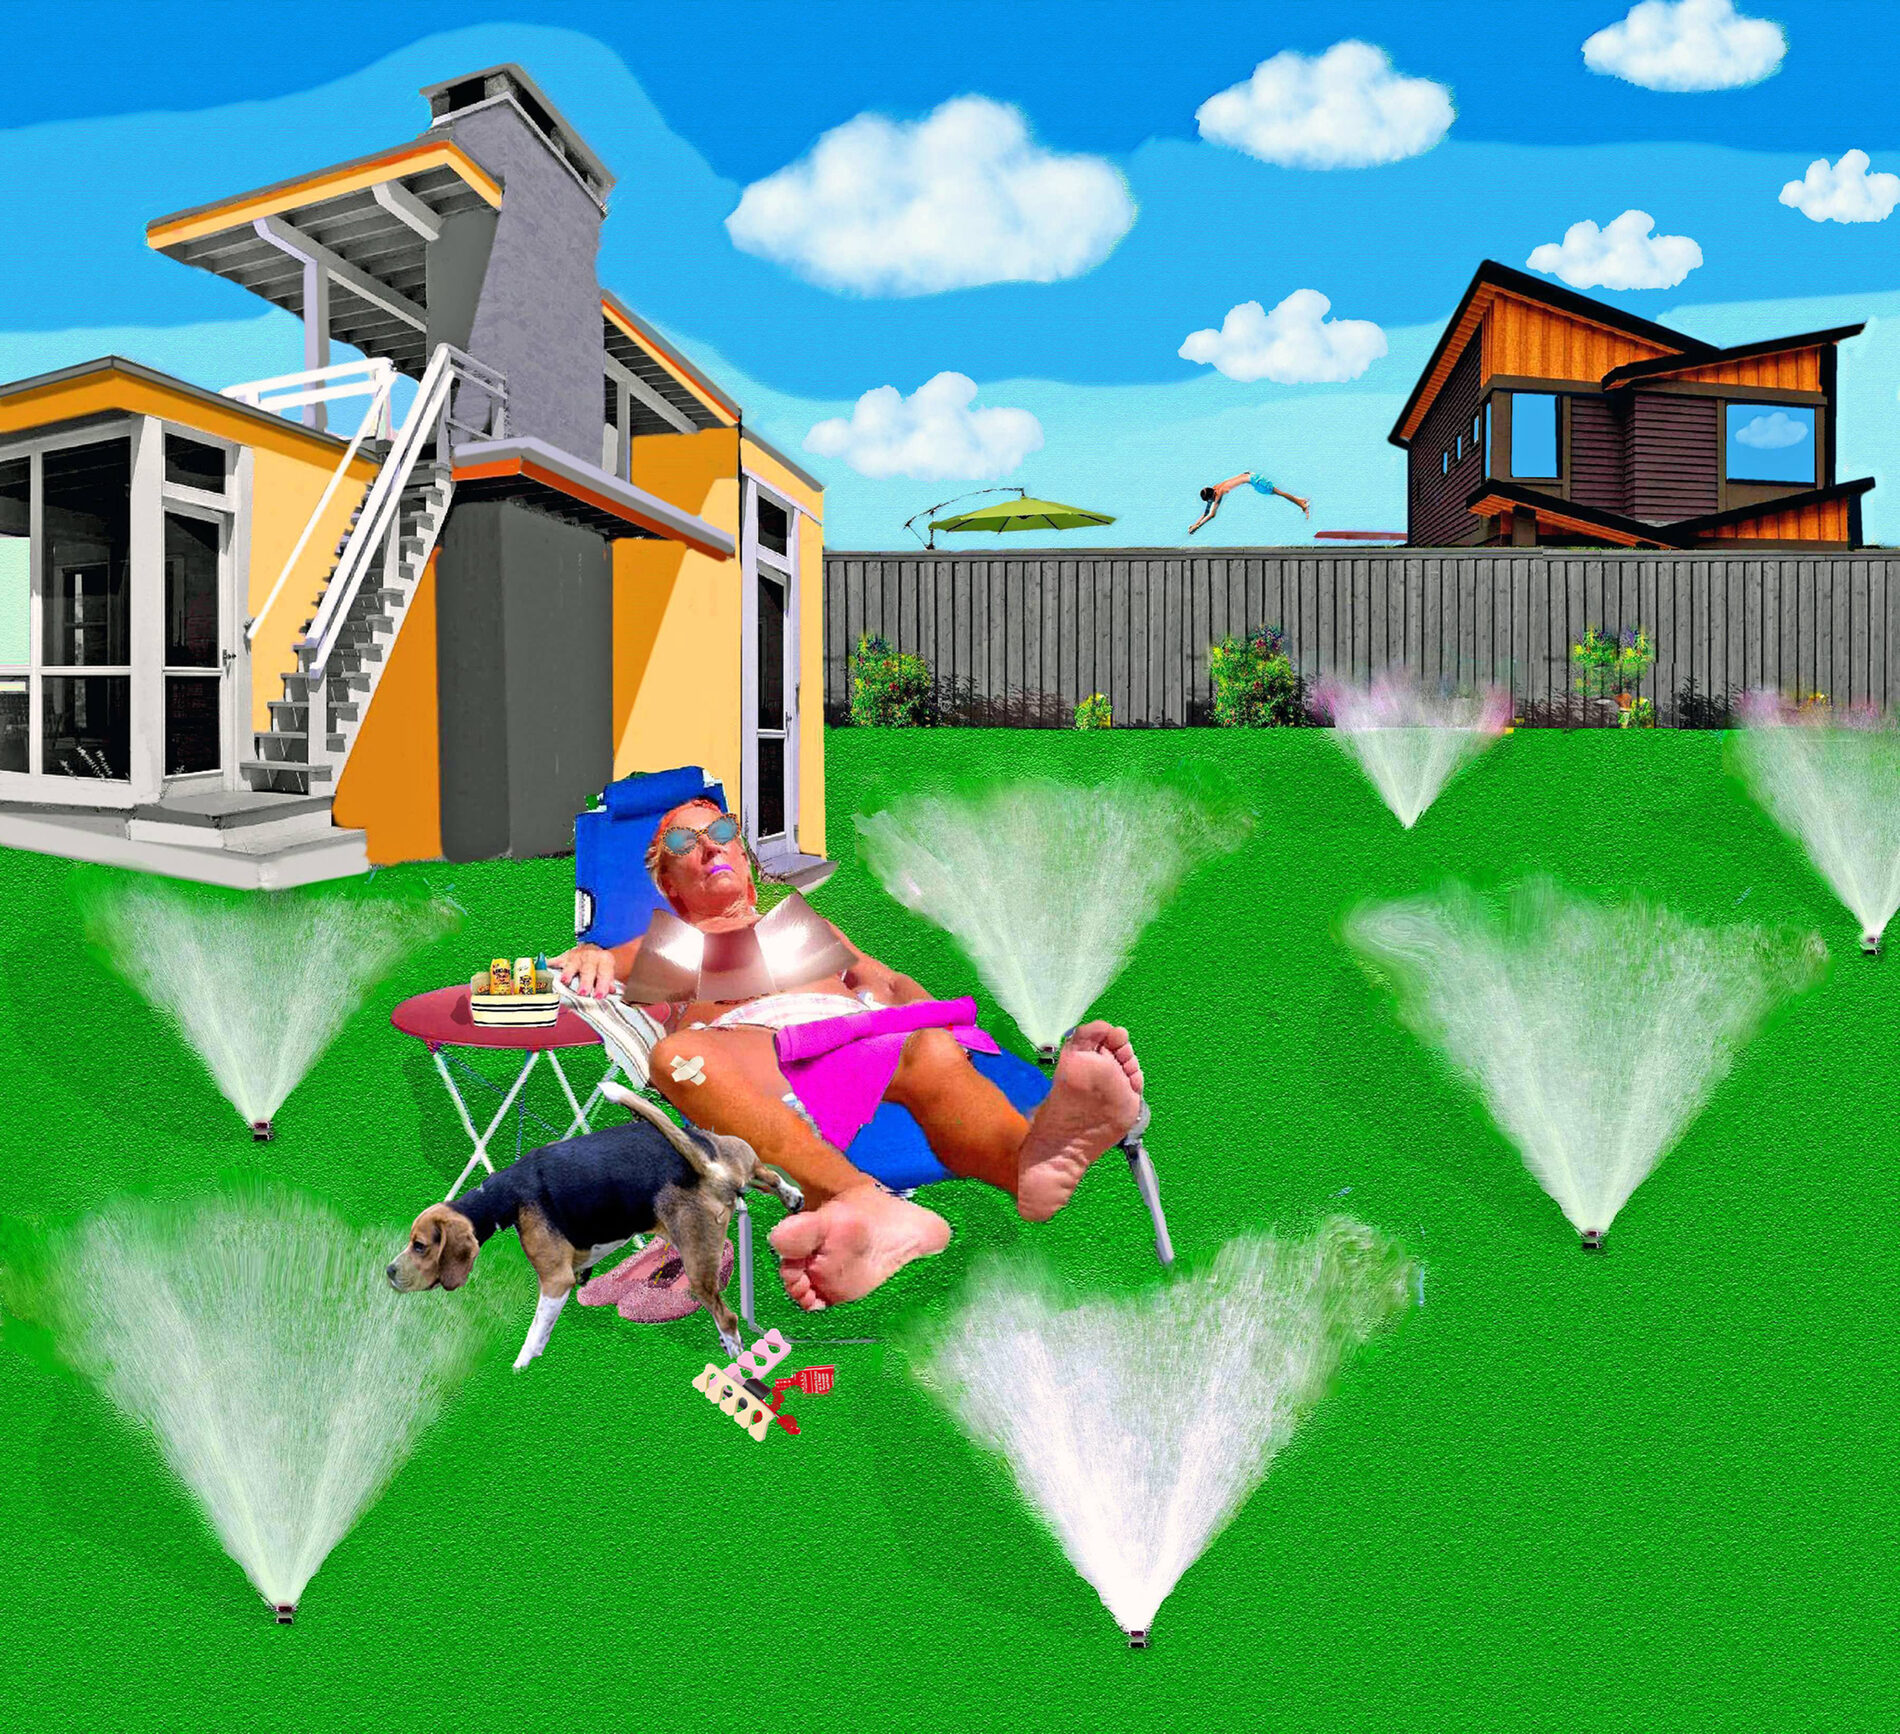 In a green yard, a middle-aged woman reclines in a chair in her bathing suit in front of a house, a pamphlet over her chest, nail polish and toe separators at her feet, over which the dog appears to be peeing. Many sprinklers are going off, and in the next yard over a person is diving off a diving board.